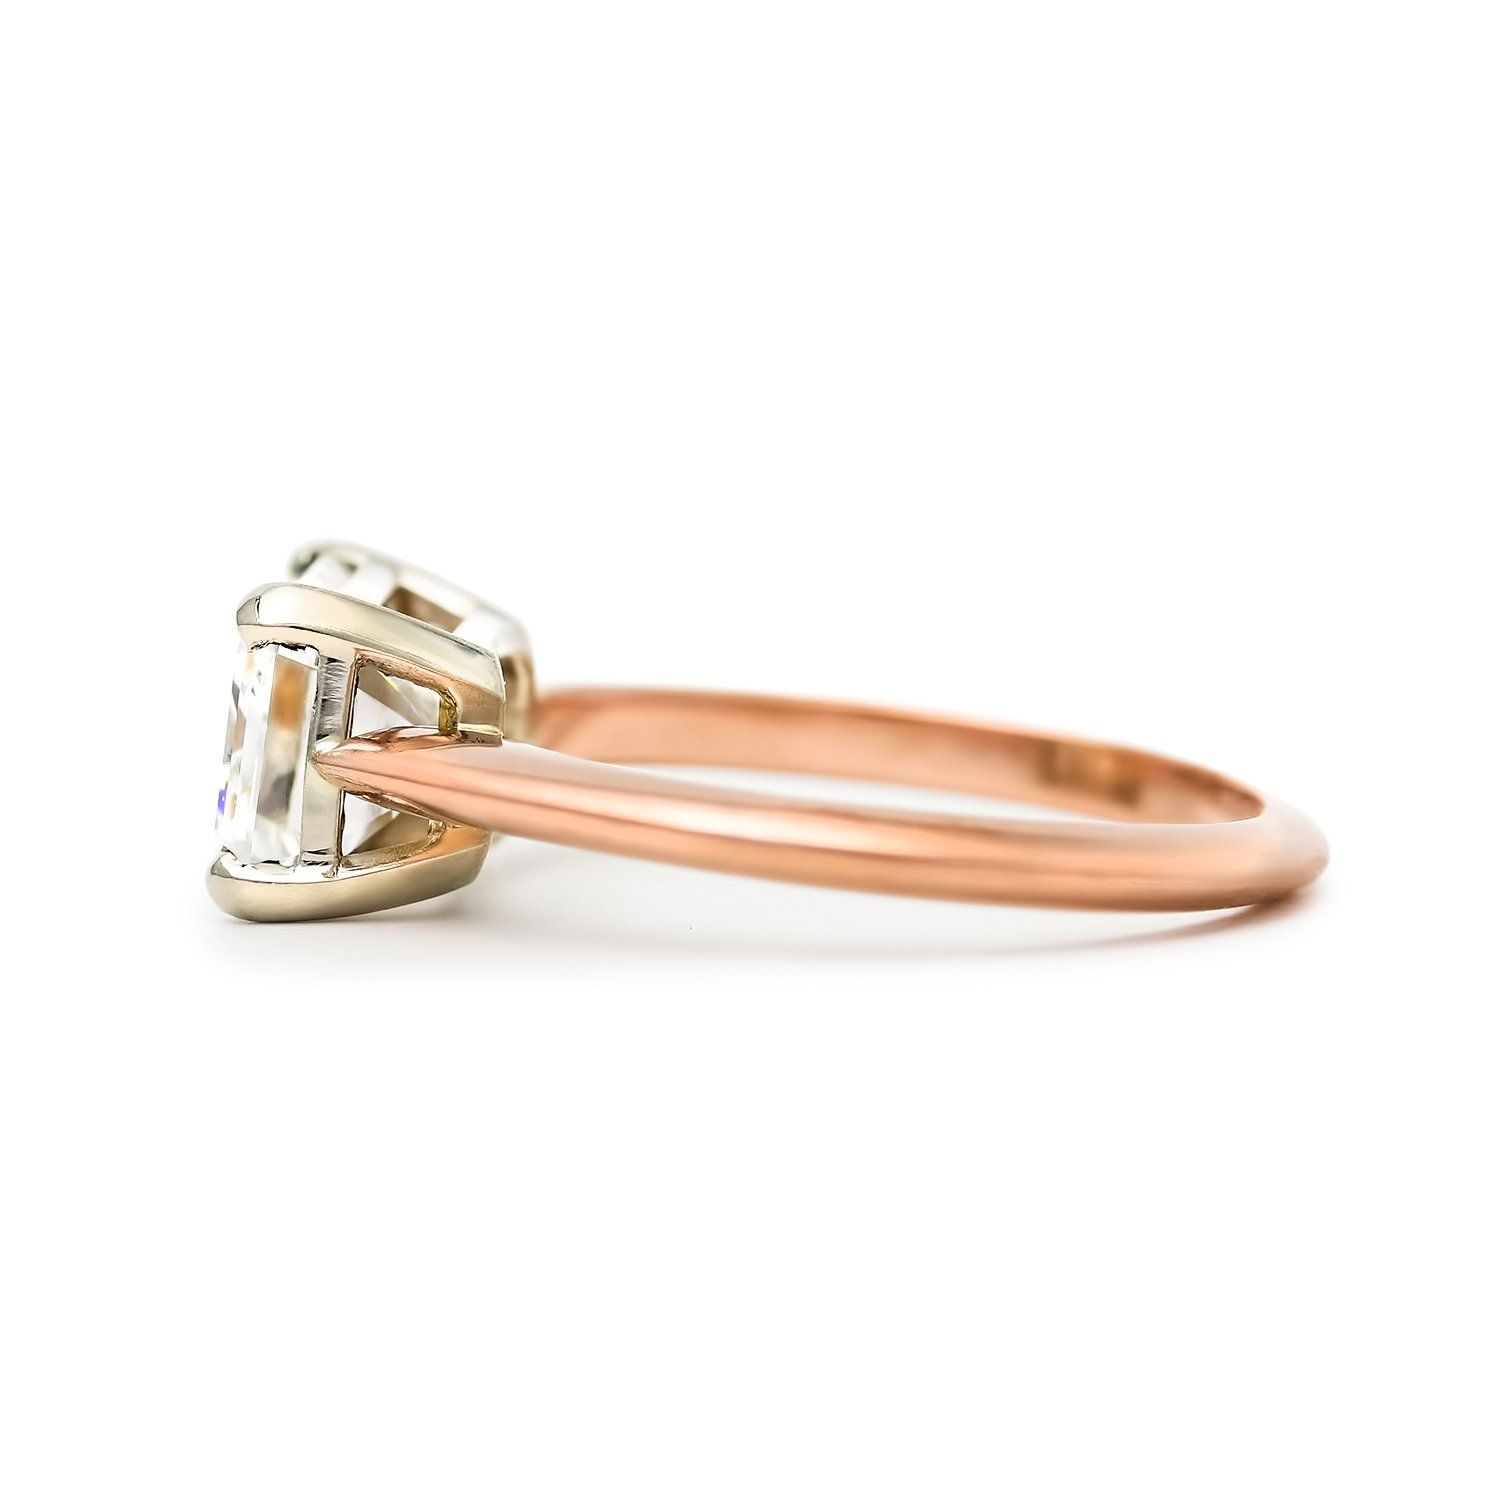 East west emerald cut diamond engagement ring in rose gold